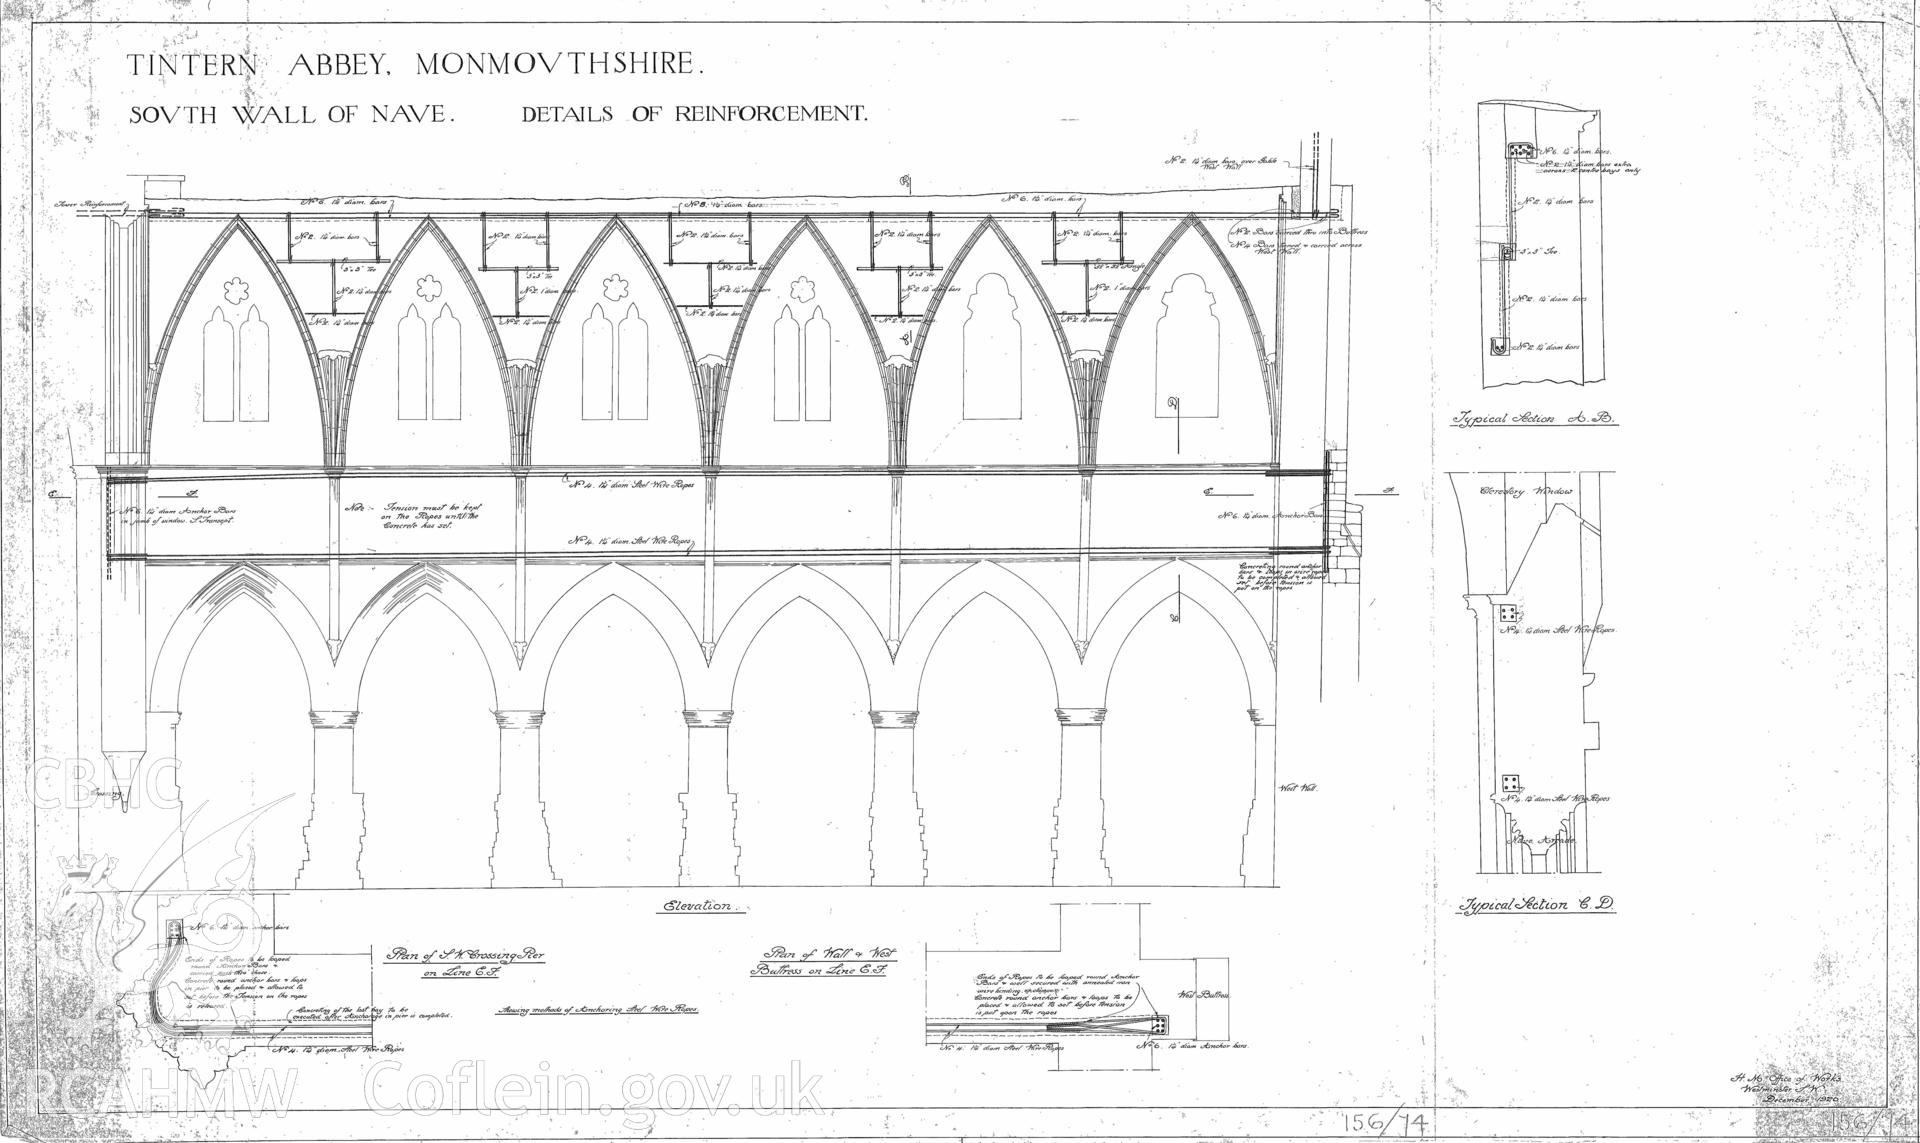 Cadw guardianship monument drawing of Tintern Abbey. S Wall of Nave Details of Reinforcement. Cadw ref. No. 156/74. No scale.